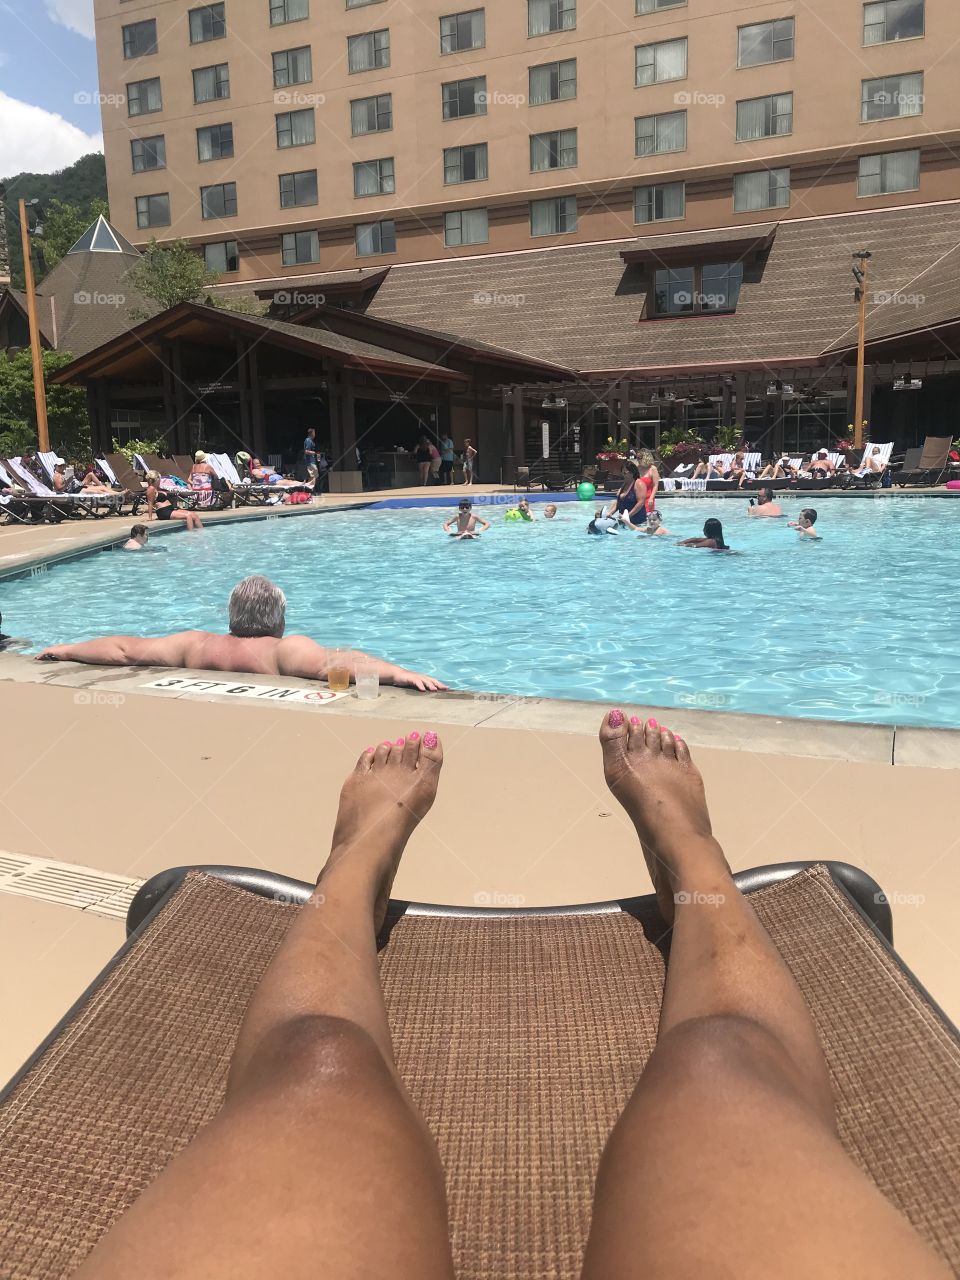 A fantastic day at Harrahs Cherokee Casino. The waters crystal blue and it was a phenomenal day. You can use this to depict relaxation or adventure for sure.  